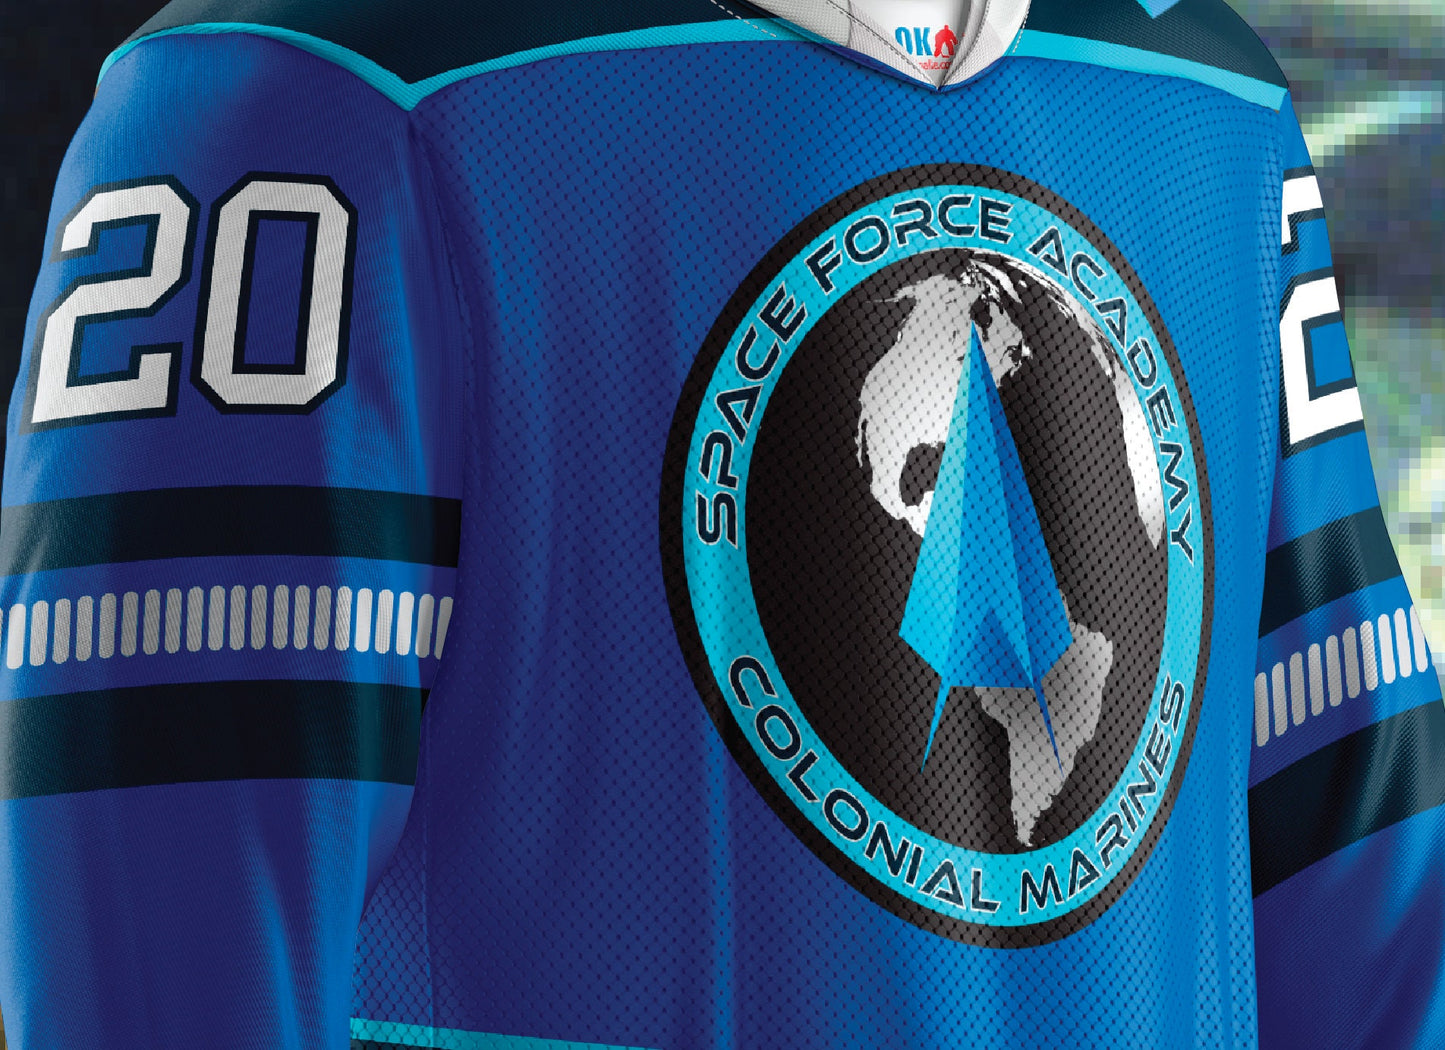 Space Force Academy Hockey Jersey